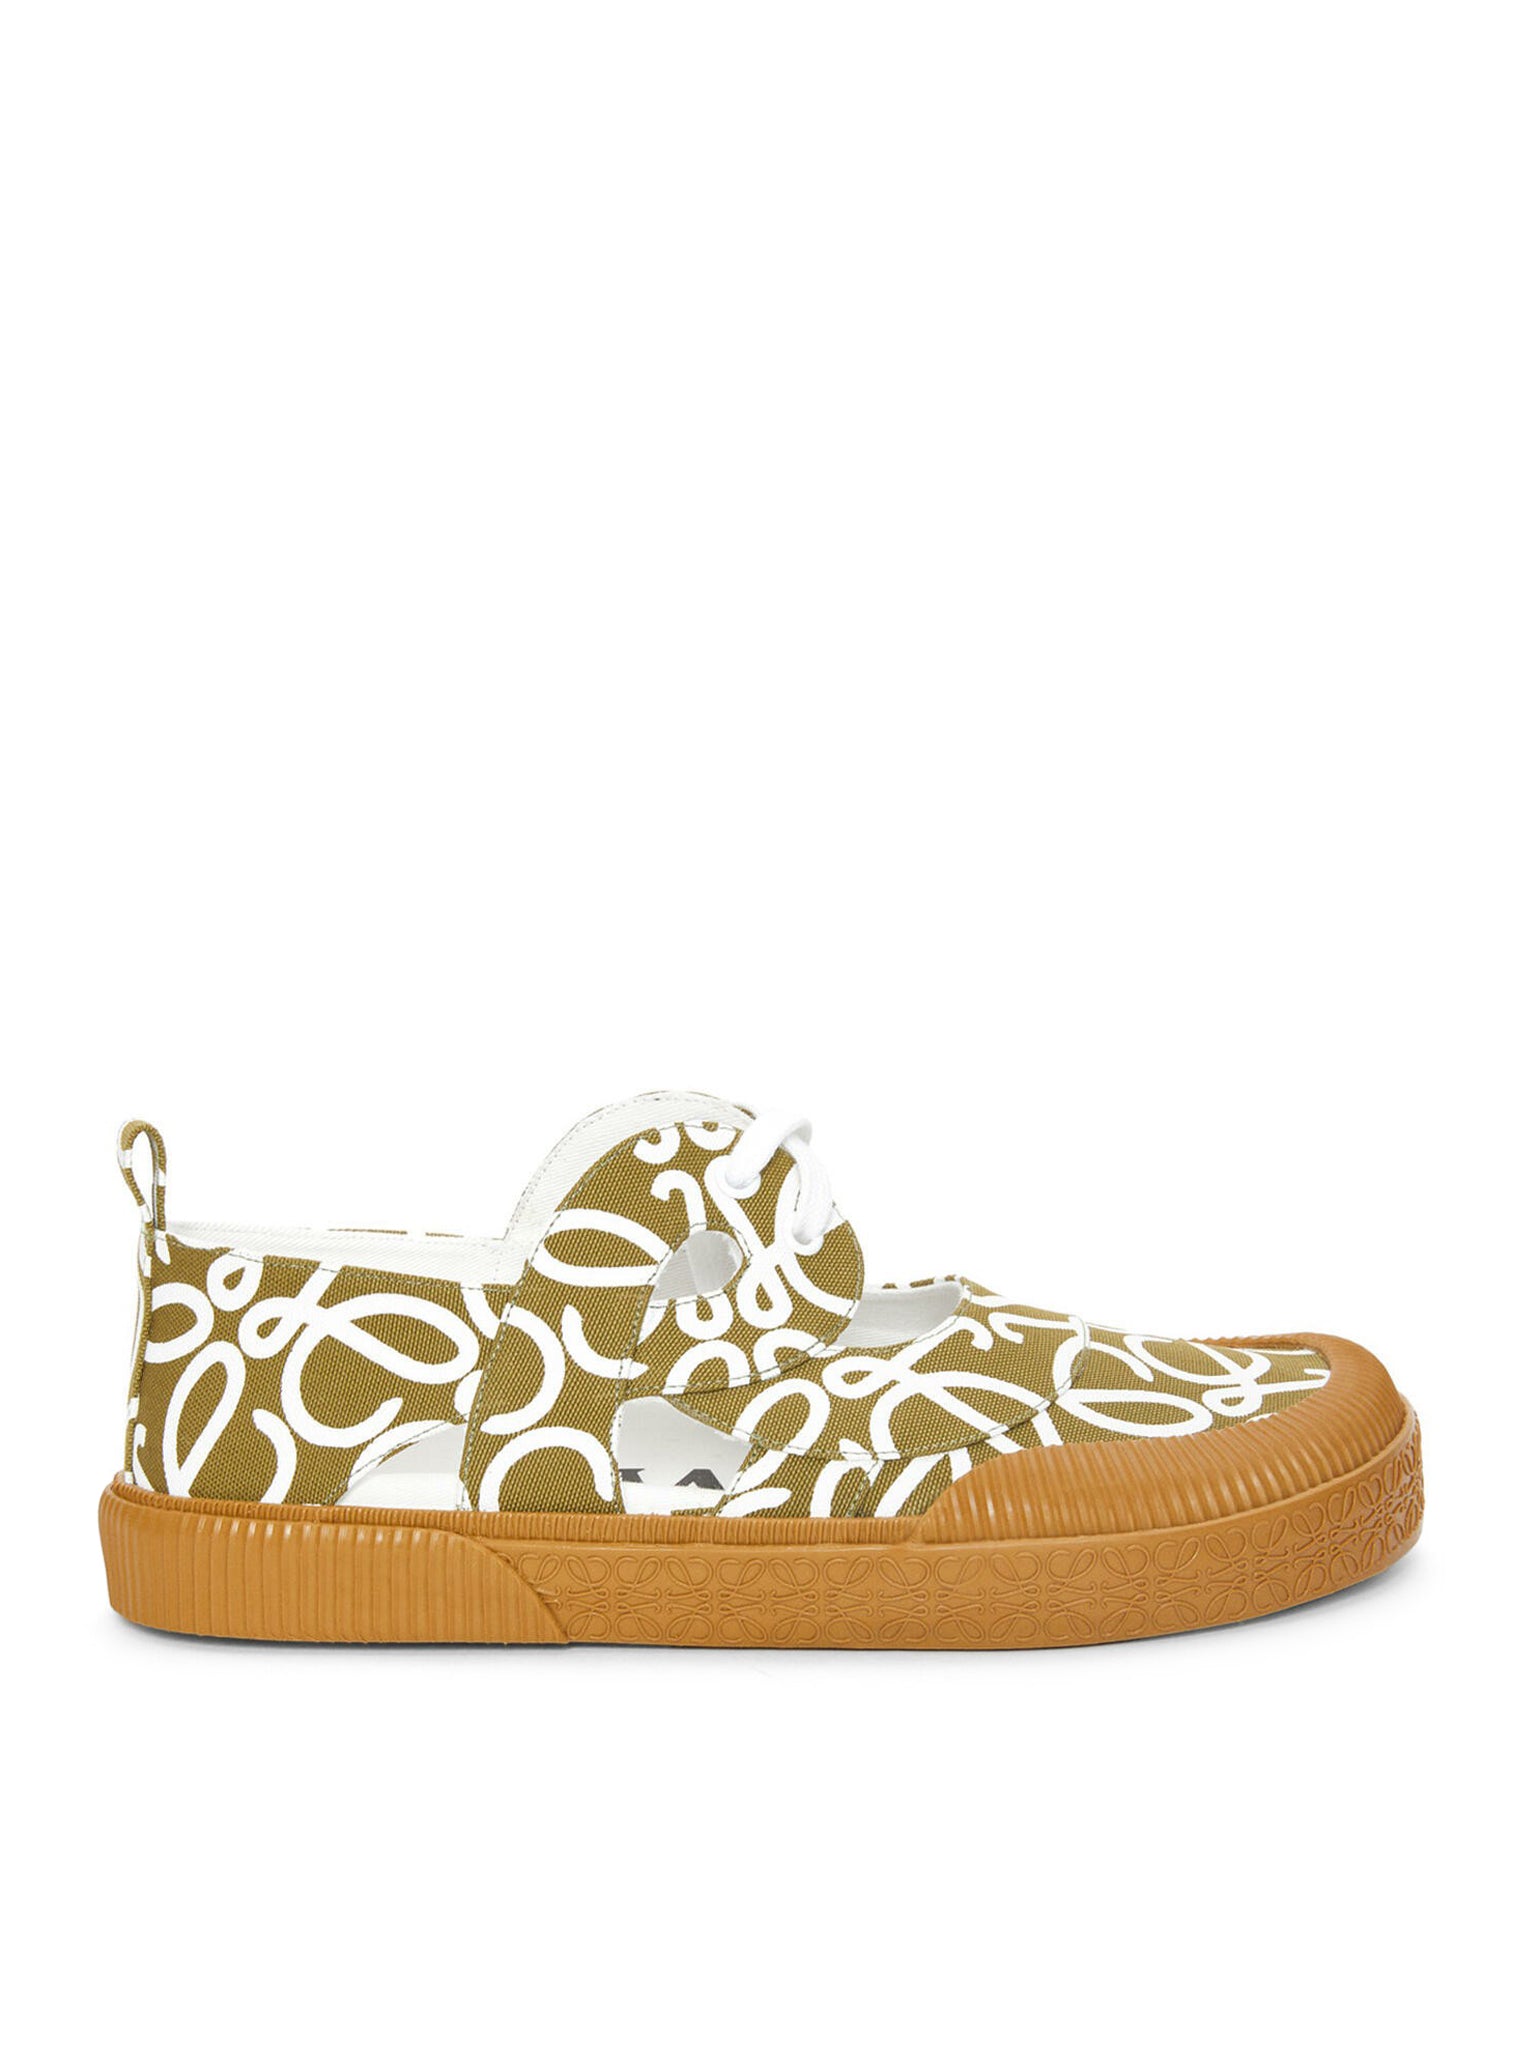 LOUIS VUITTON NOUMEA SNEAKERS 38 IN MONOGRAM CANVAS AND SUEDE